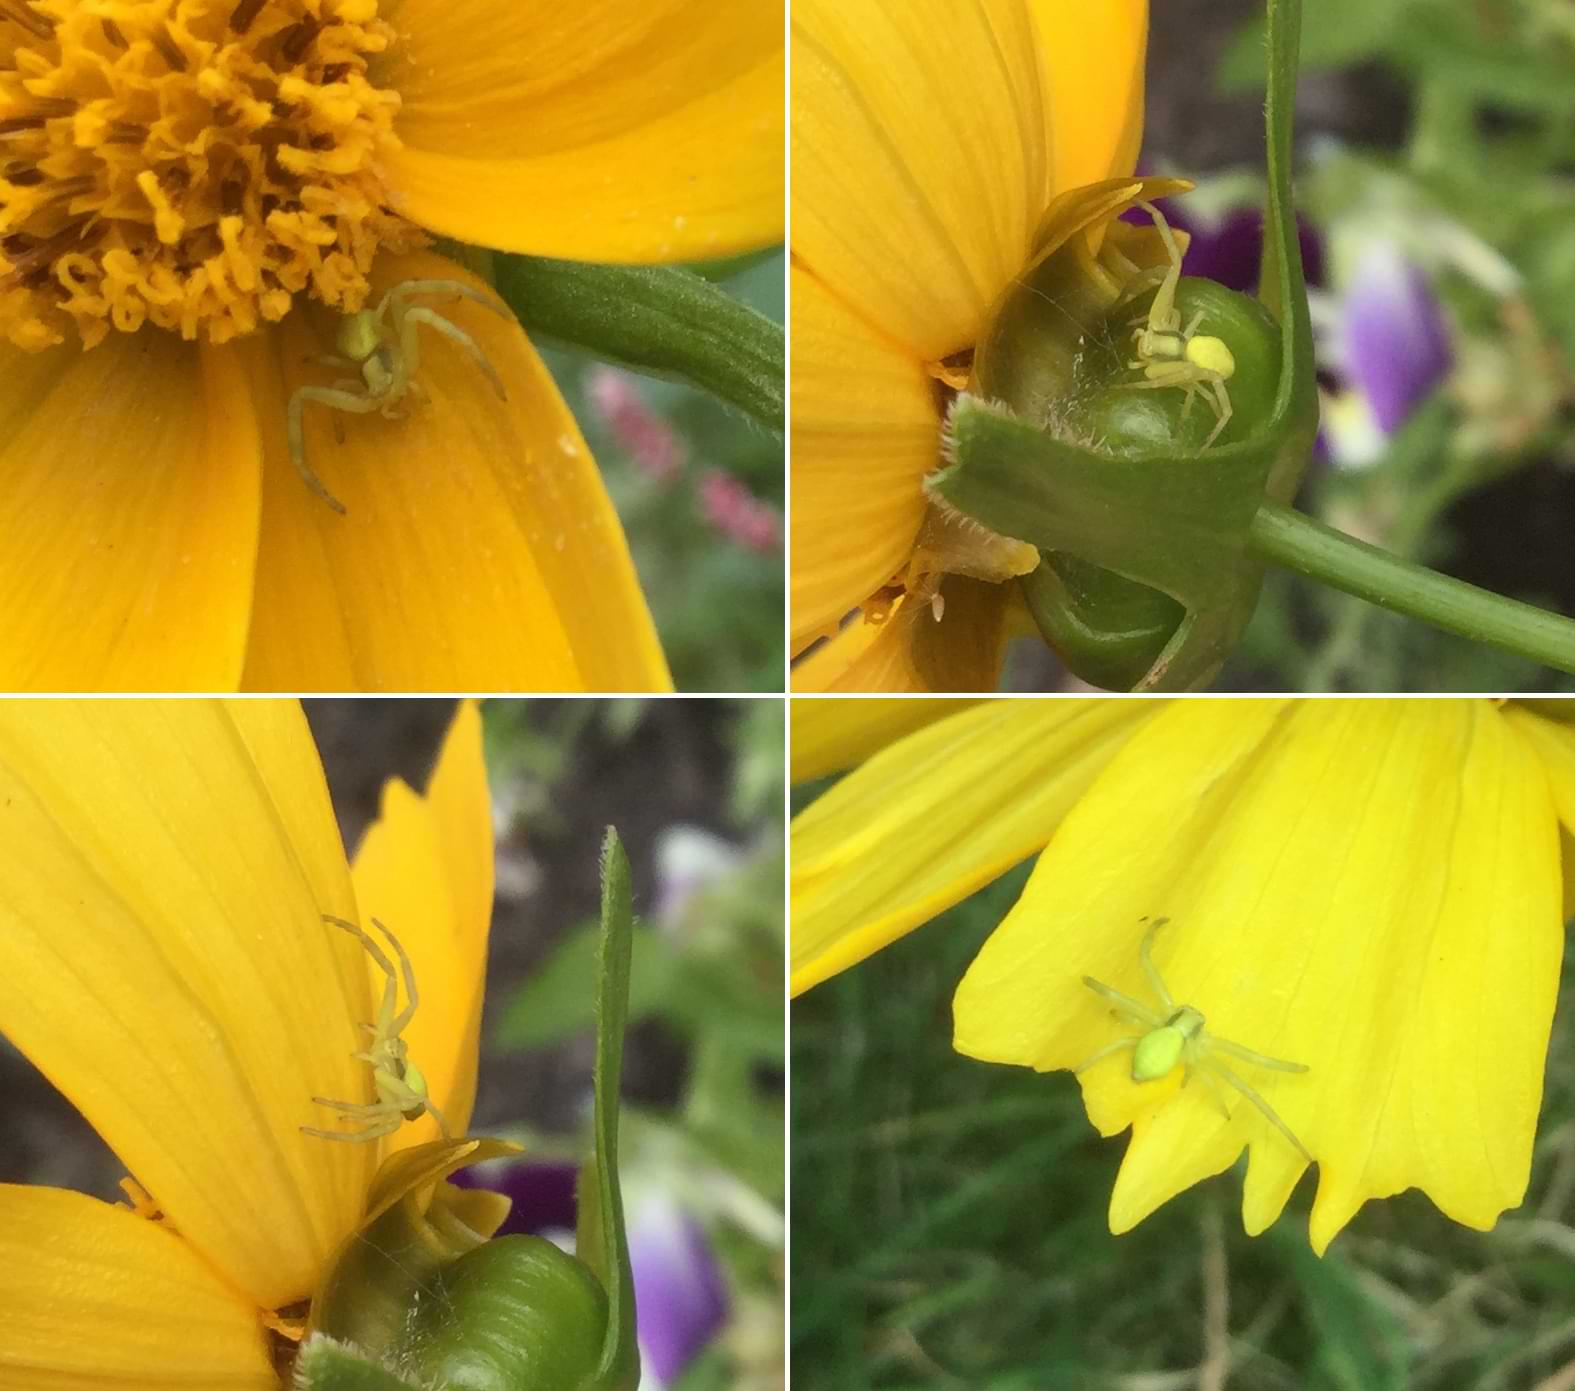 Collage of four photos of a spider crawling around the stem and petals of a bright yellow flower. The spider has long legs that are sprawled out wide, and has an abdomen that is the exact shape and colour of a lemon. Running down the sides of the spider's body are two dark brown stripes.